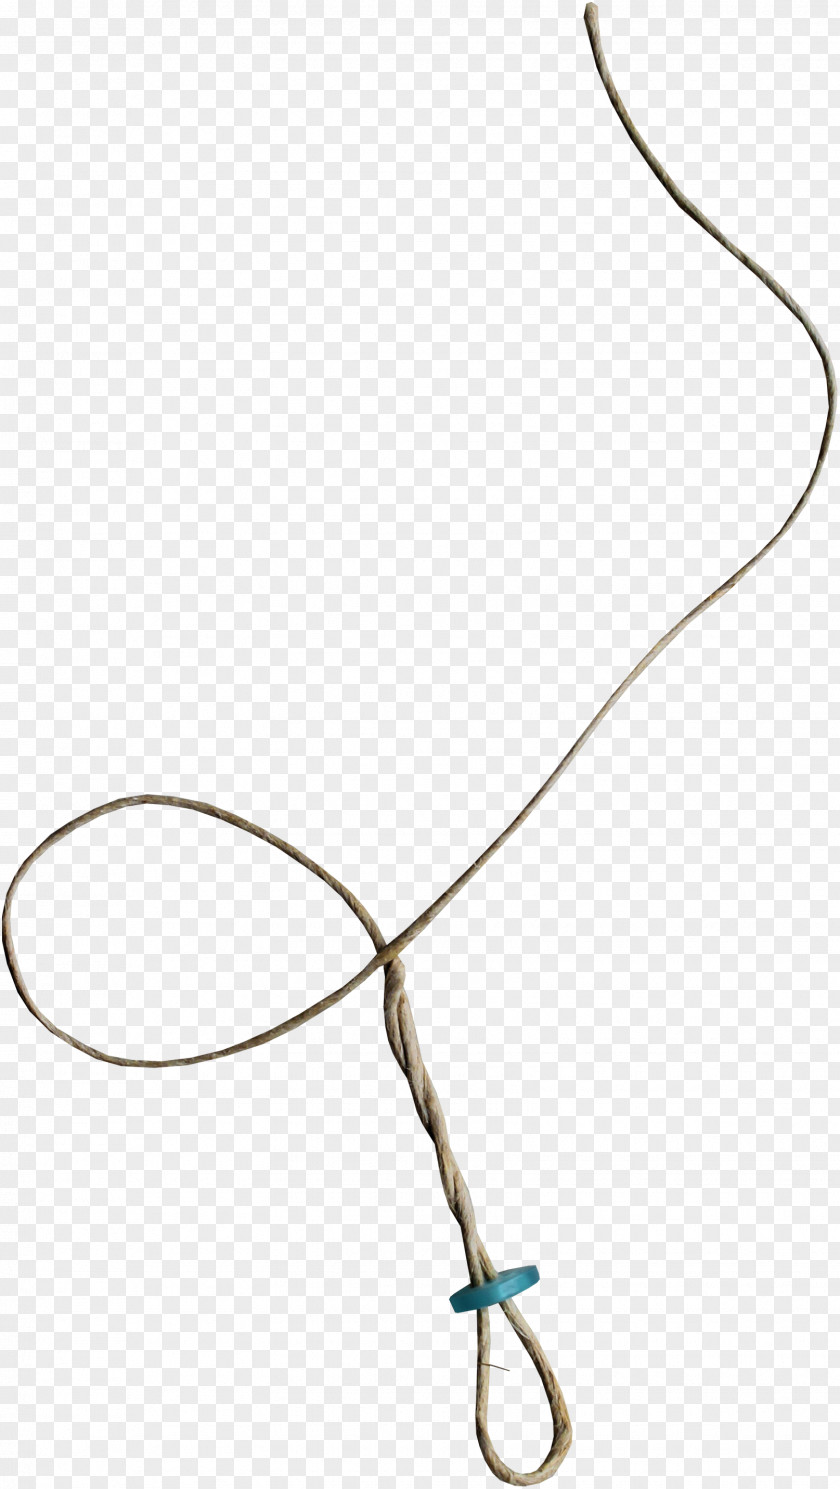 Brown Knotted Rope Knot Gratis PNG